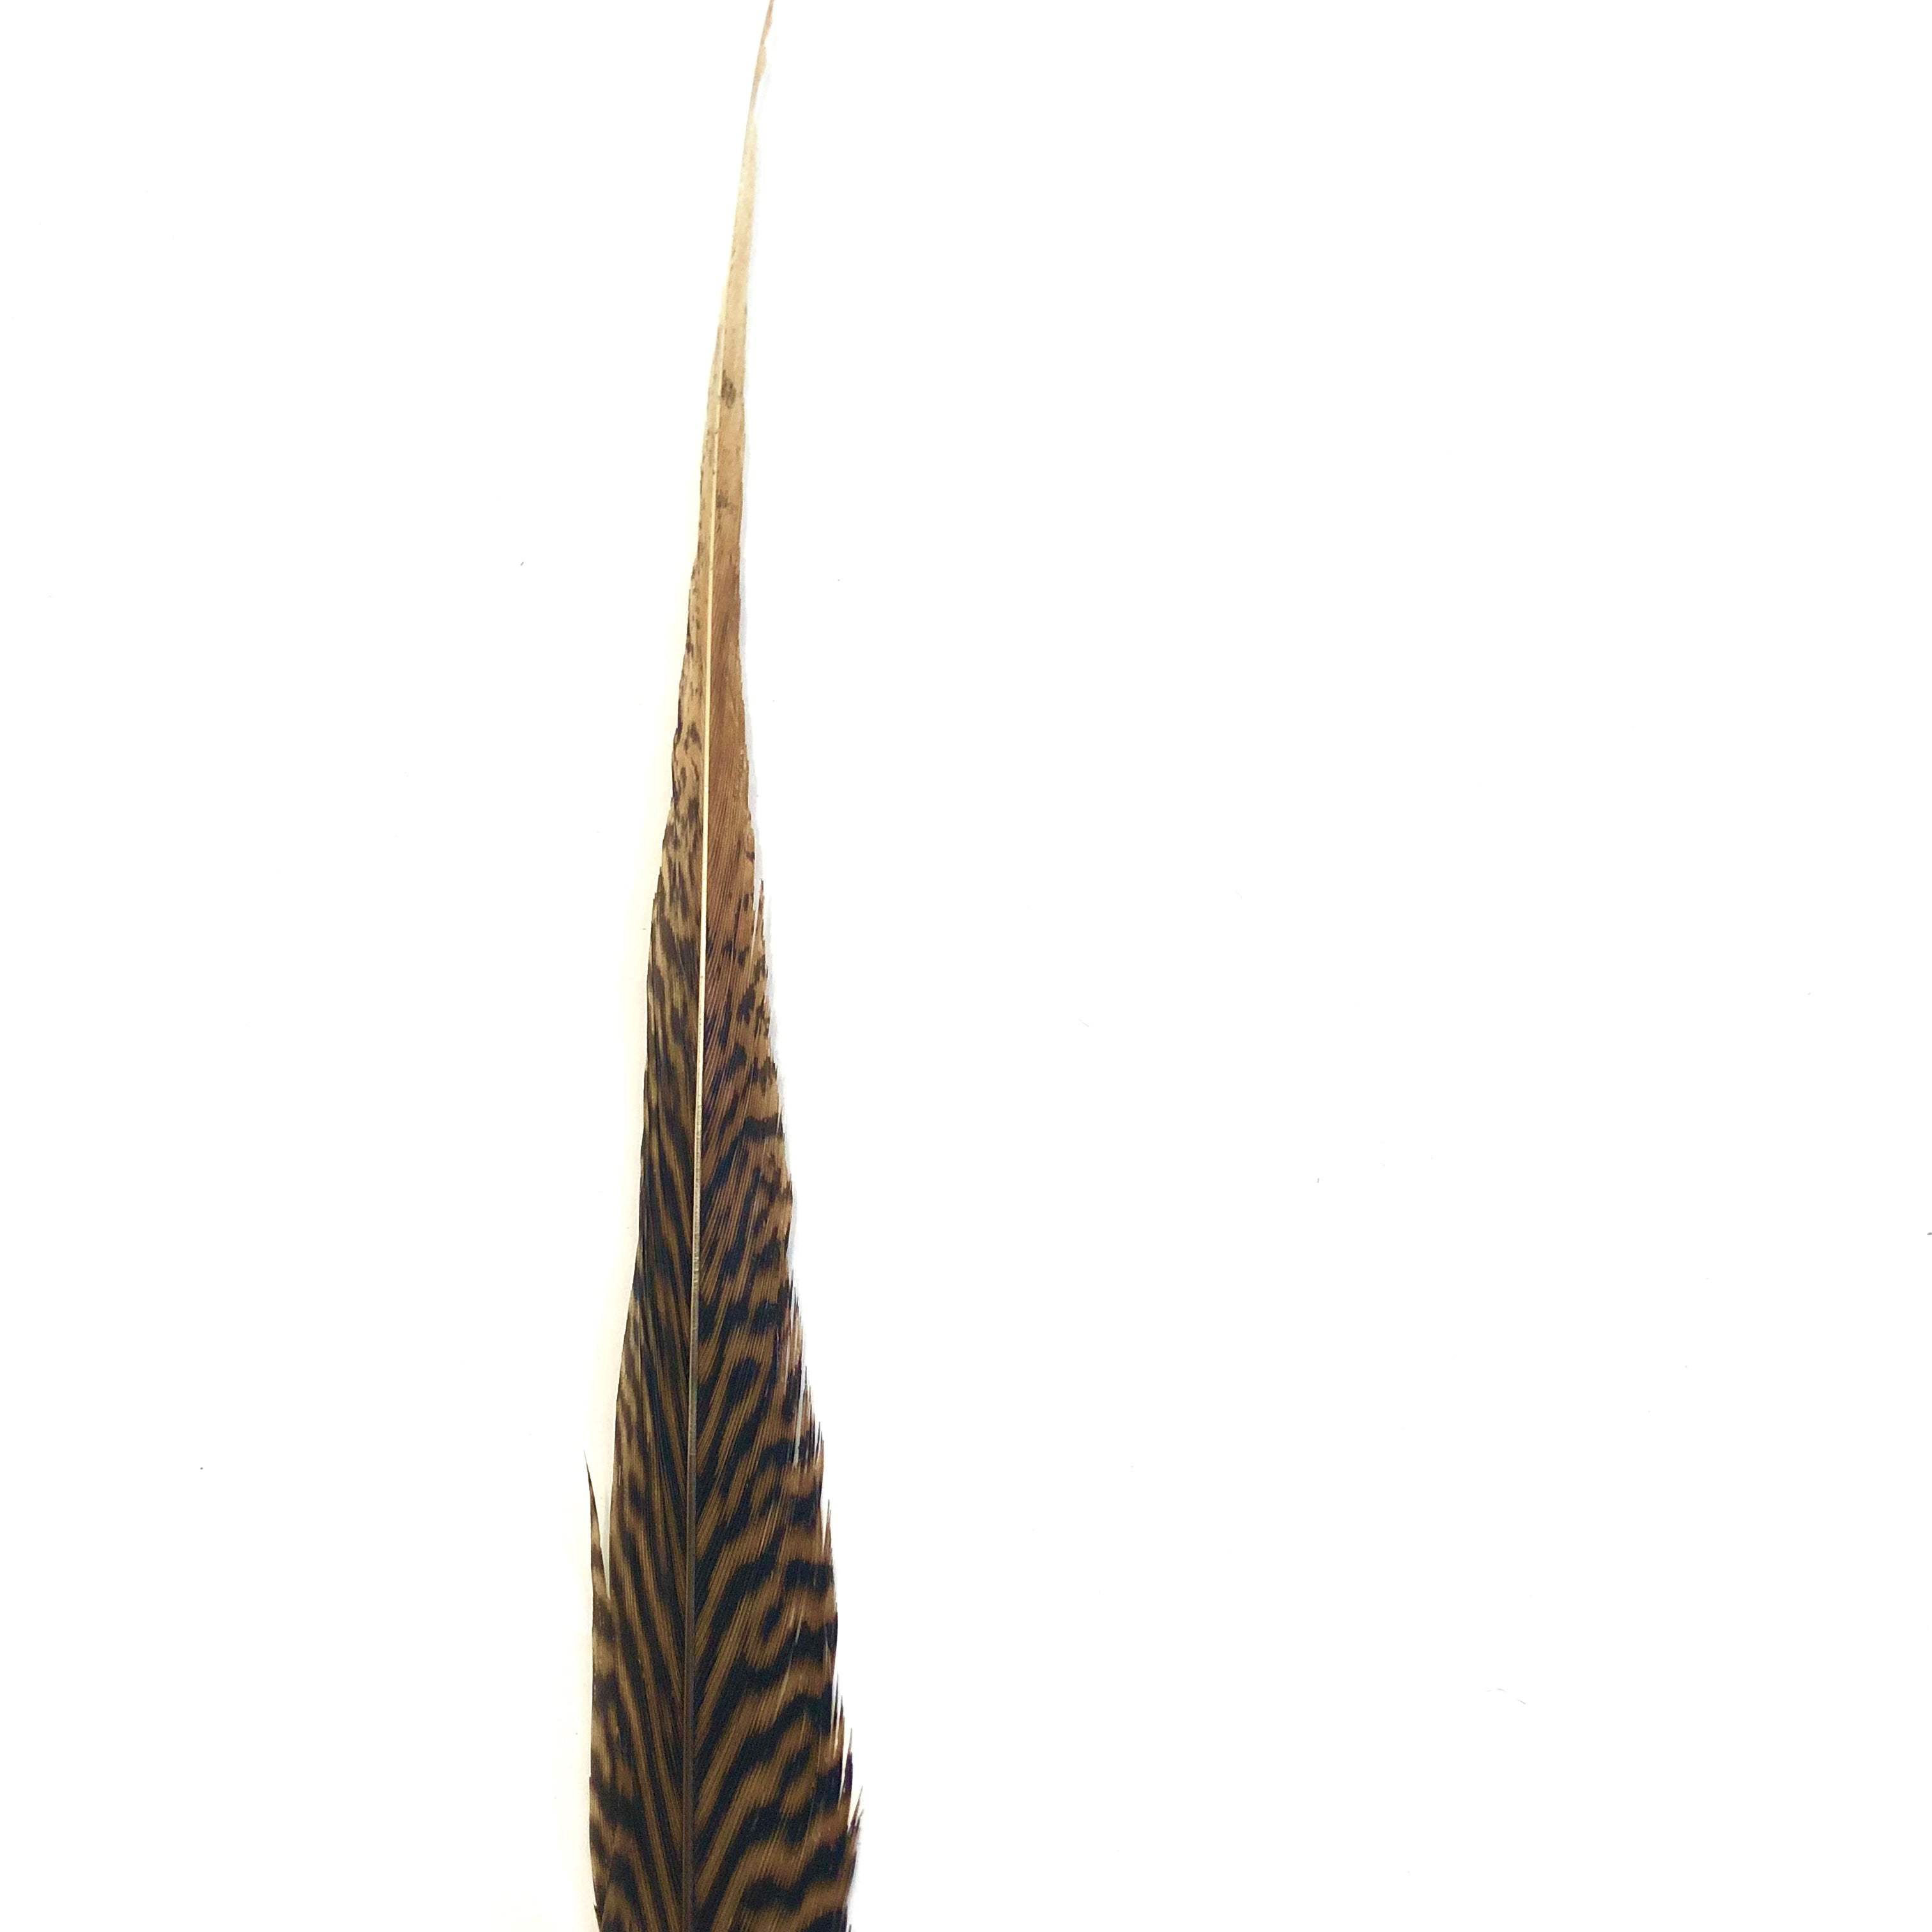 10" to 20" Golden Pheasant Side Tail Feather - Natural